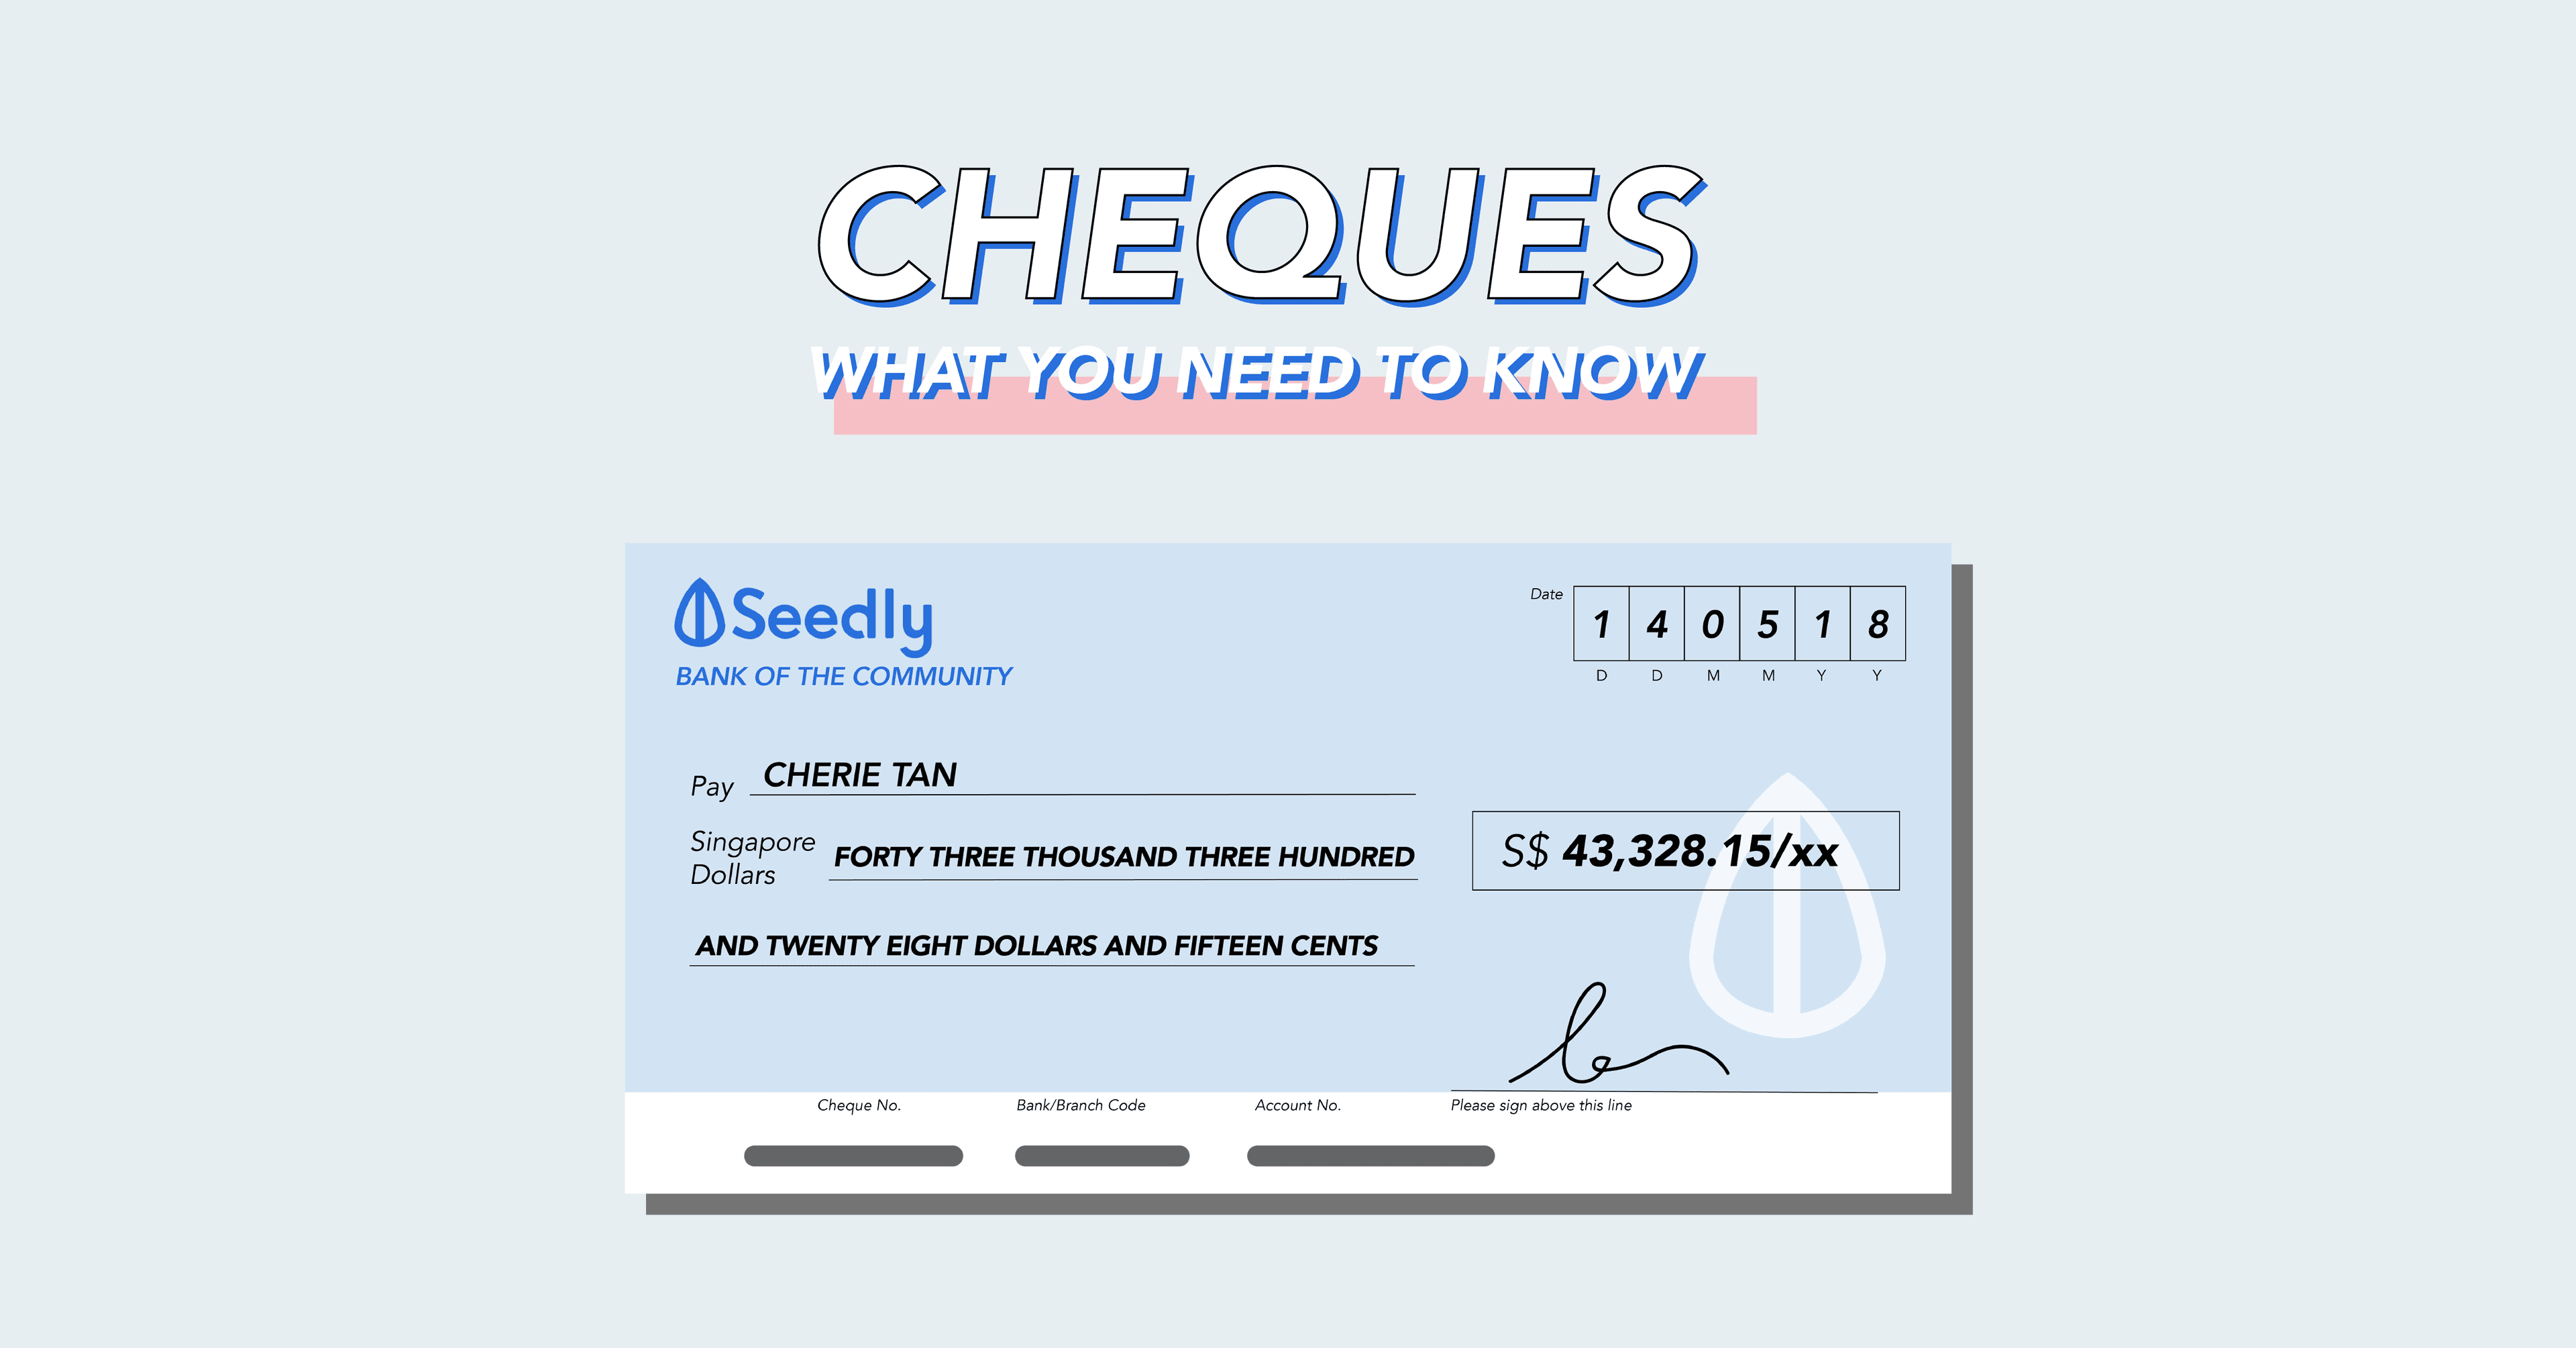 What you need to know about cheques